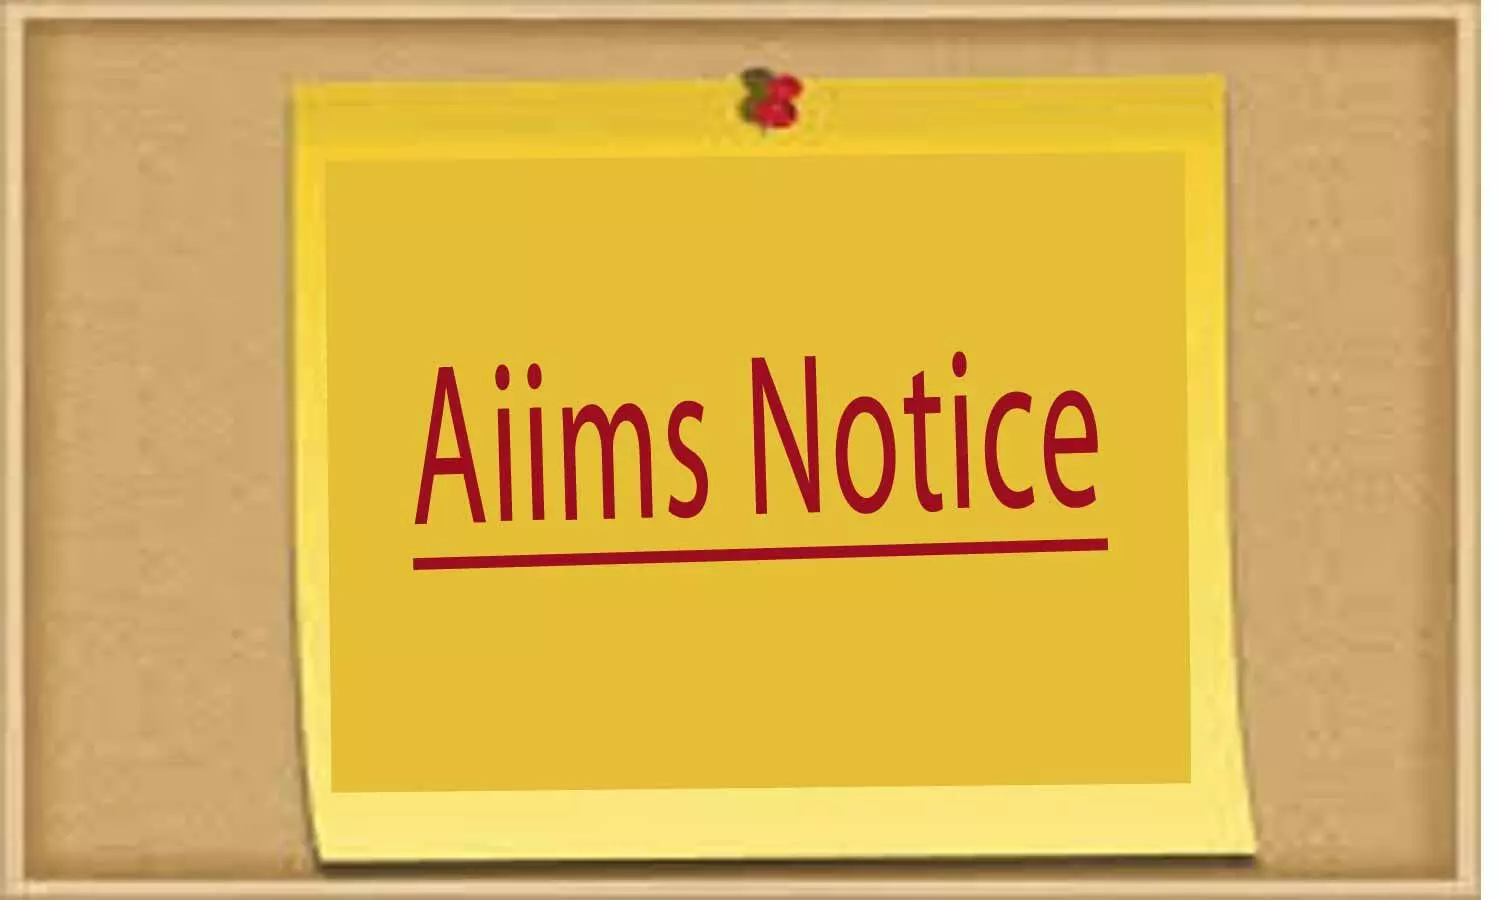 AIIMS Bhopal notifies on physical classes for MBBS, BSc Nursing Students